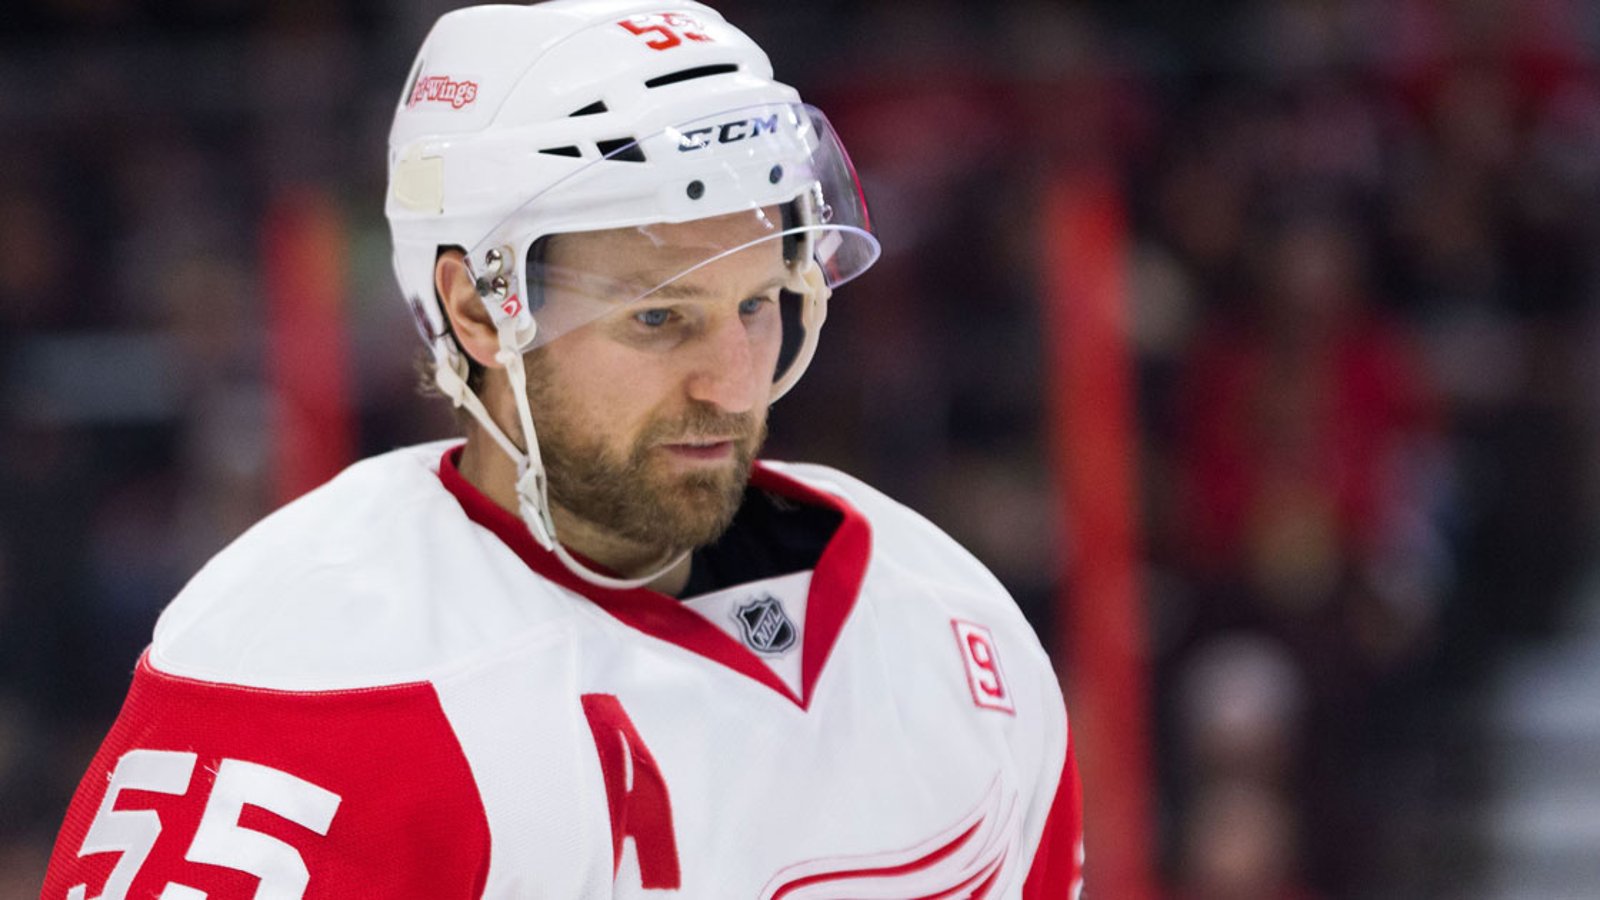 Injury update: Great news in Red Wings land